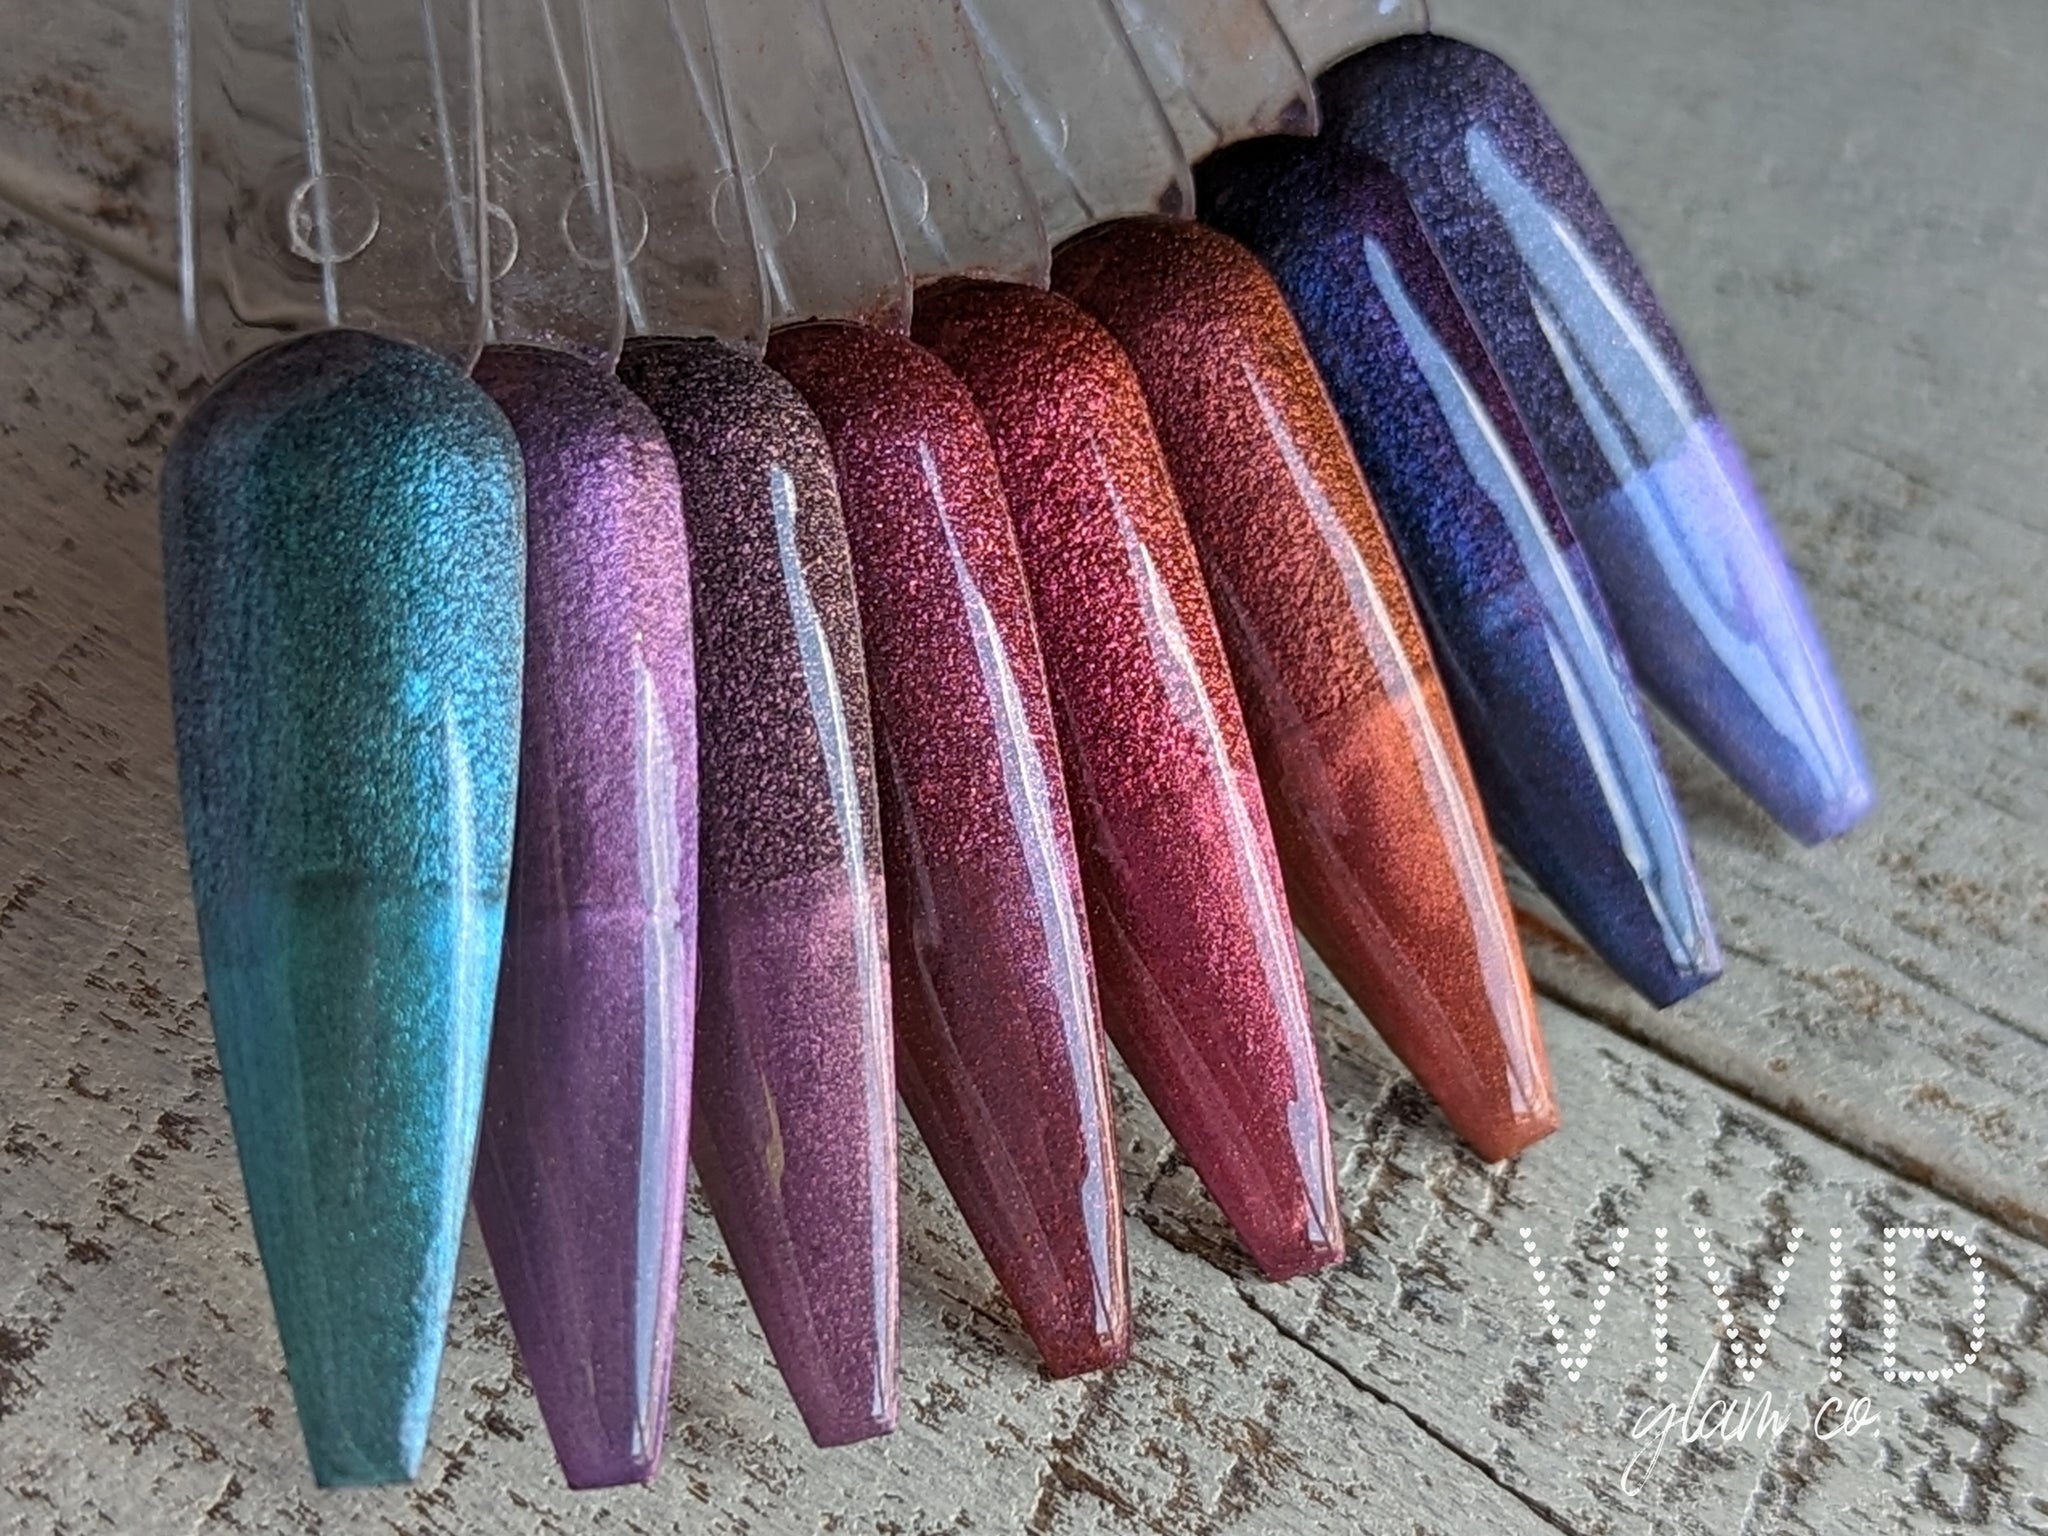 Mermaid Scales Collection